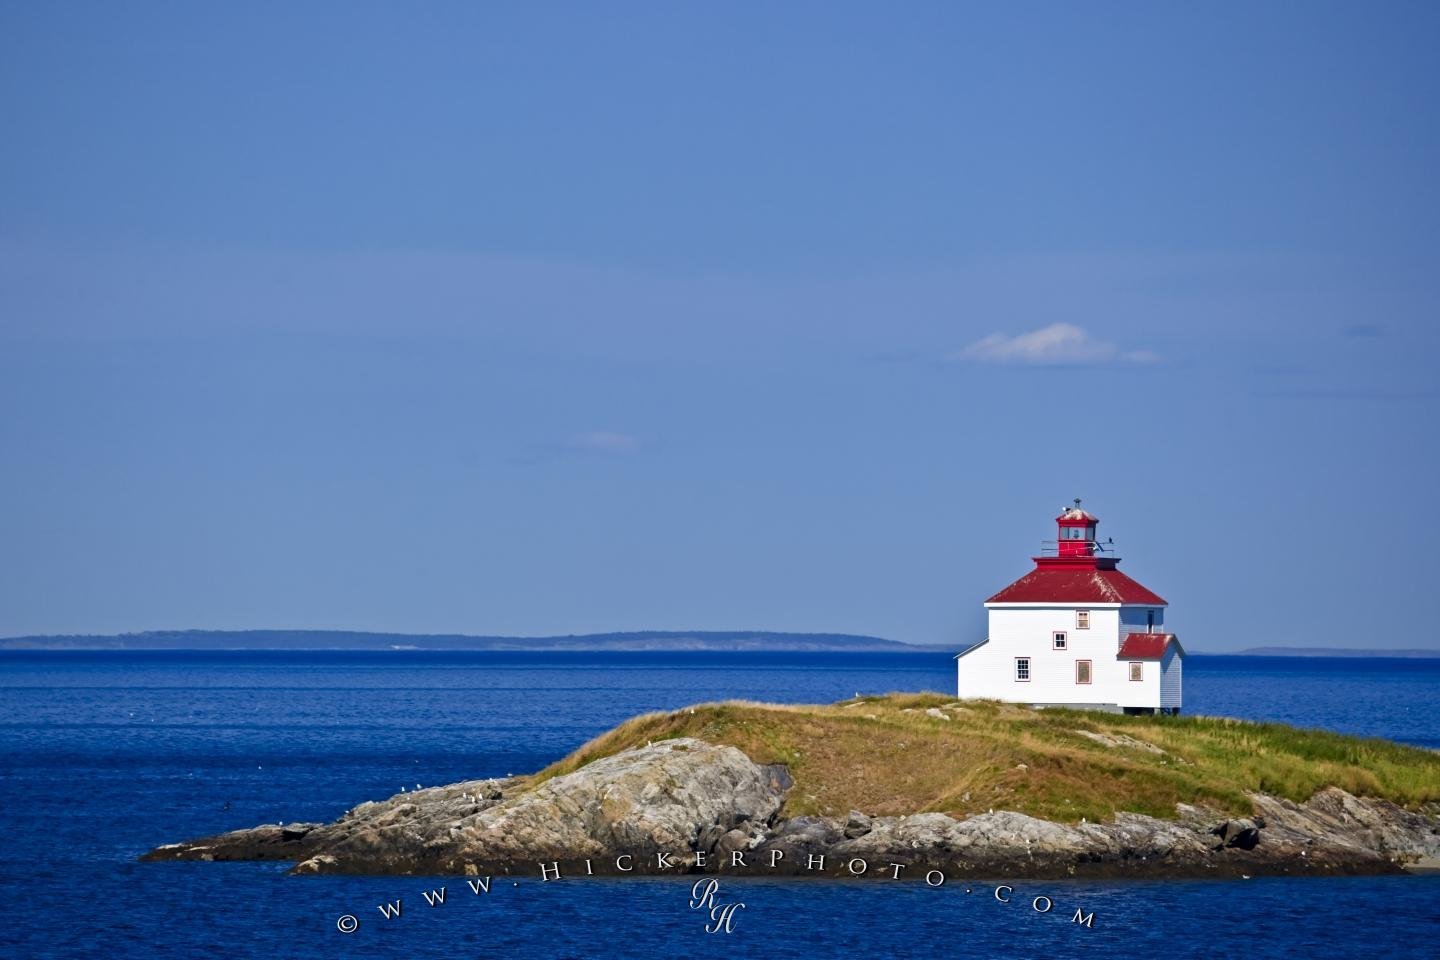 Wallpaper Background Queensport Lighthouse Chedabucto Bay Nova Scotia